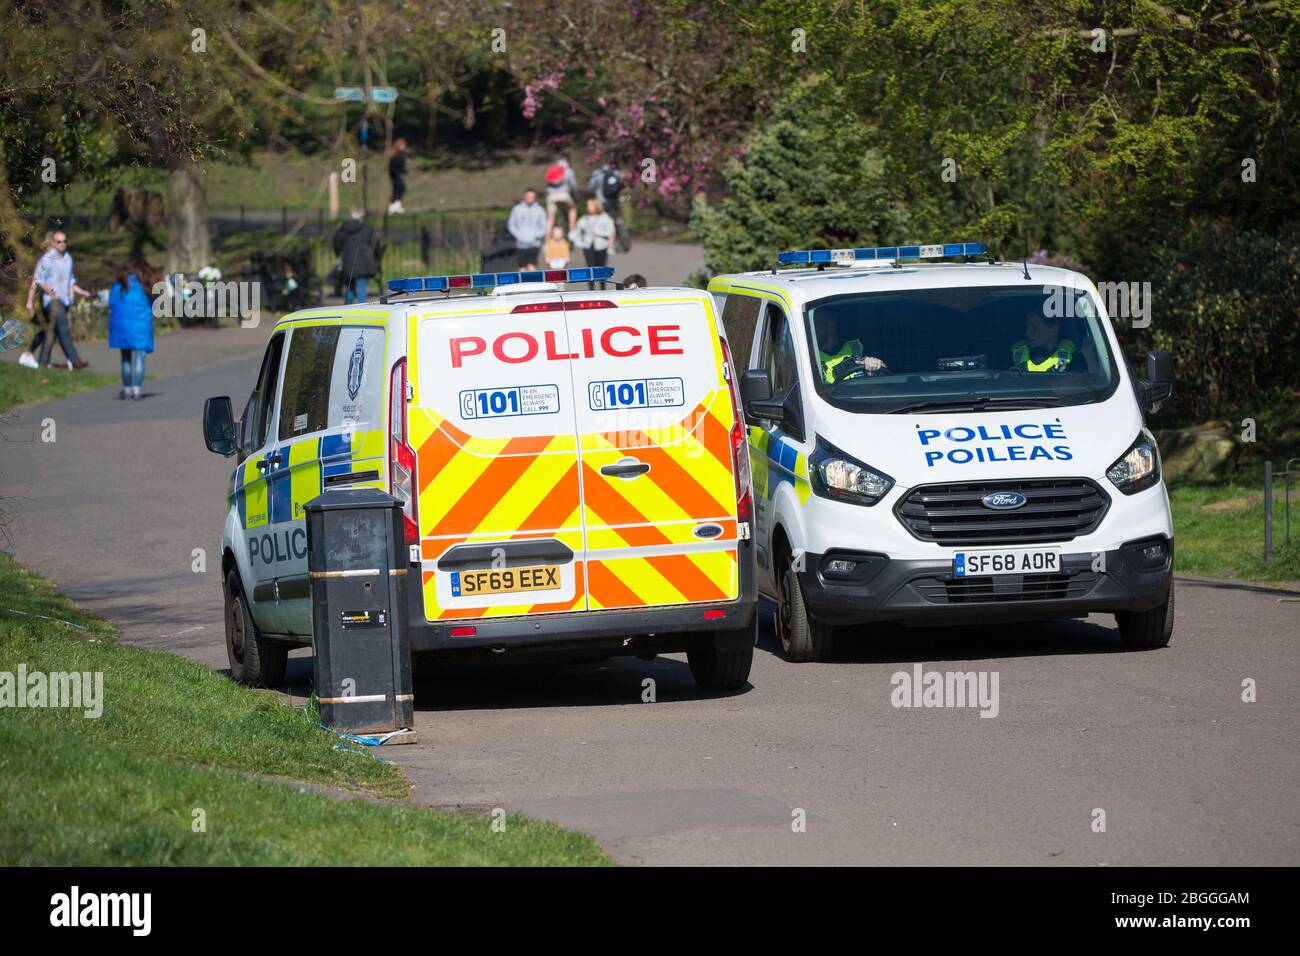 Glasgow, UK. 21st Apr, 2020. Pictured: A high police presence in the park to ensure that everyone is social distancing and taking not more than their allotted one hour of daily exercise. Scenes from Kelvingrove Park in Glasgow during the coronavirus (COVID-19) lockdown. Credit: Colin Fisher/Alamy Live News Stock Photo